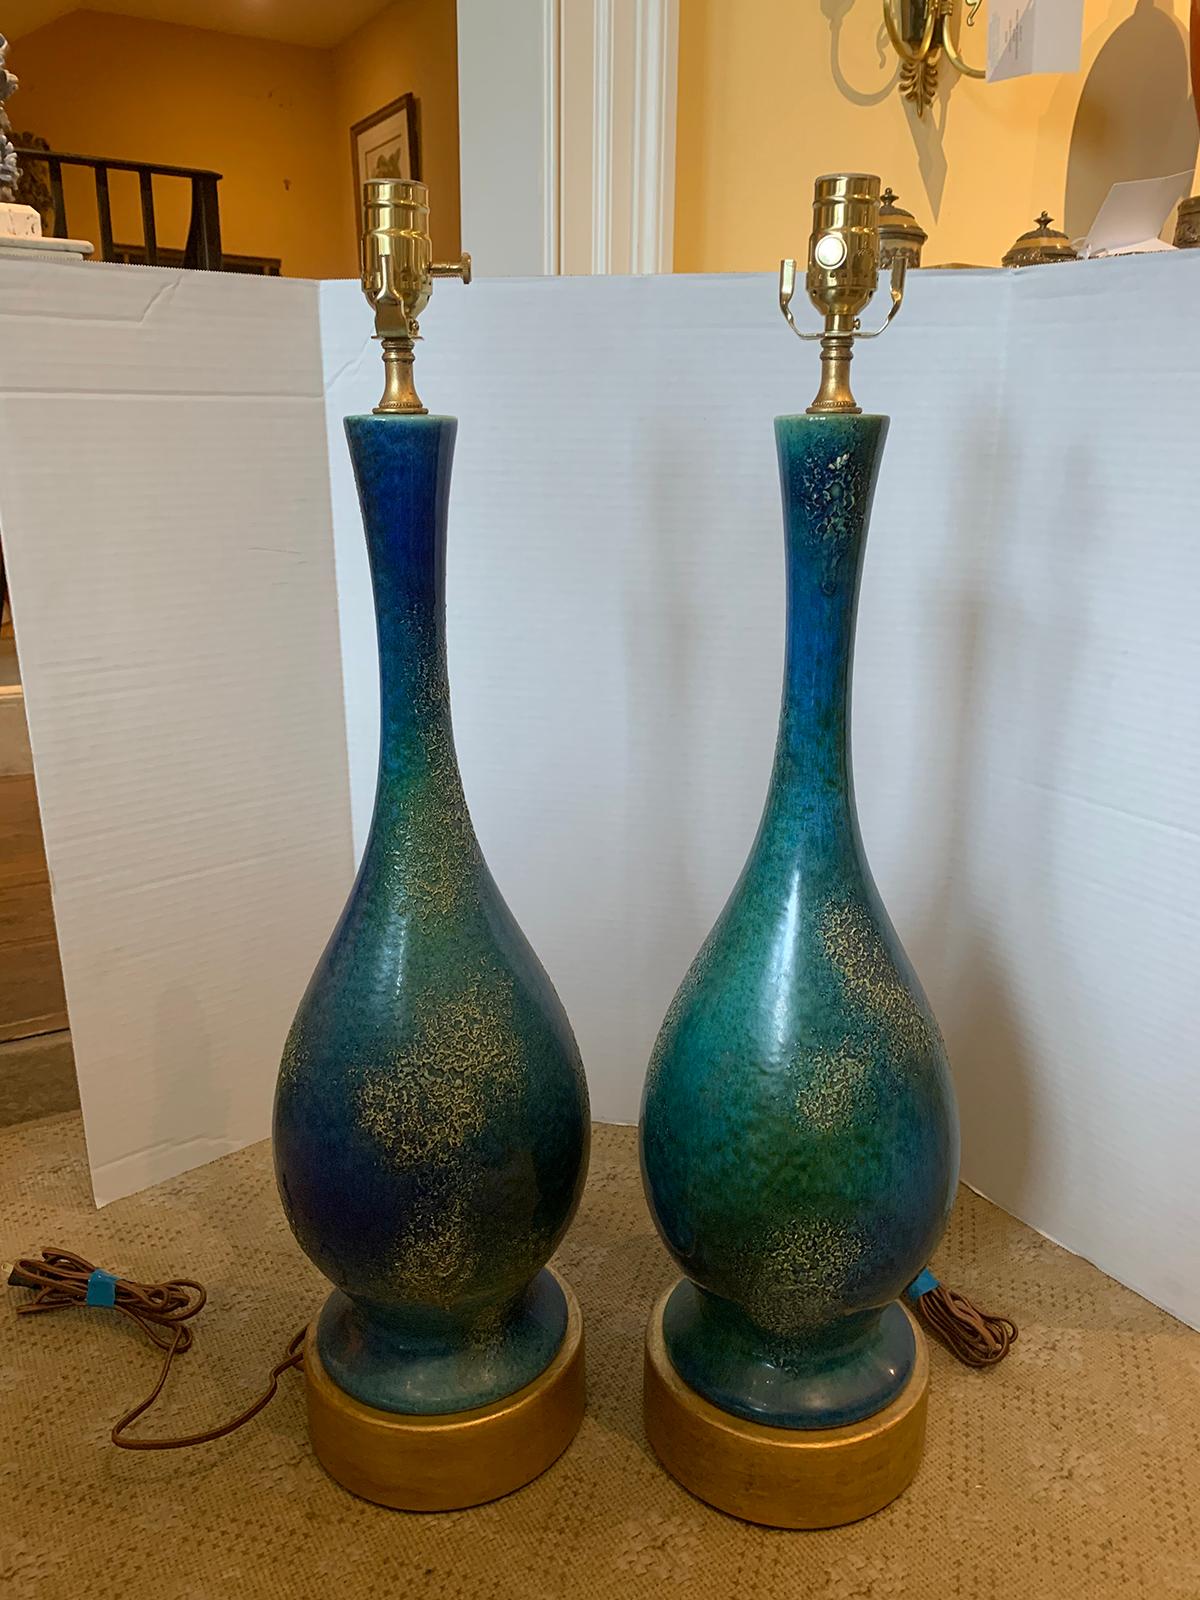 Pair of Mid-20th Century American Turquoise Glazed Royal Haeger Pottery Lamps 5